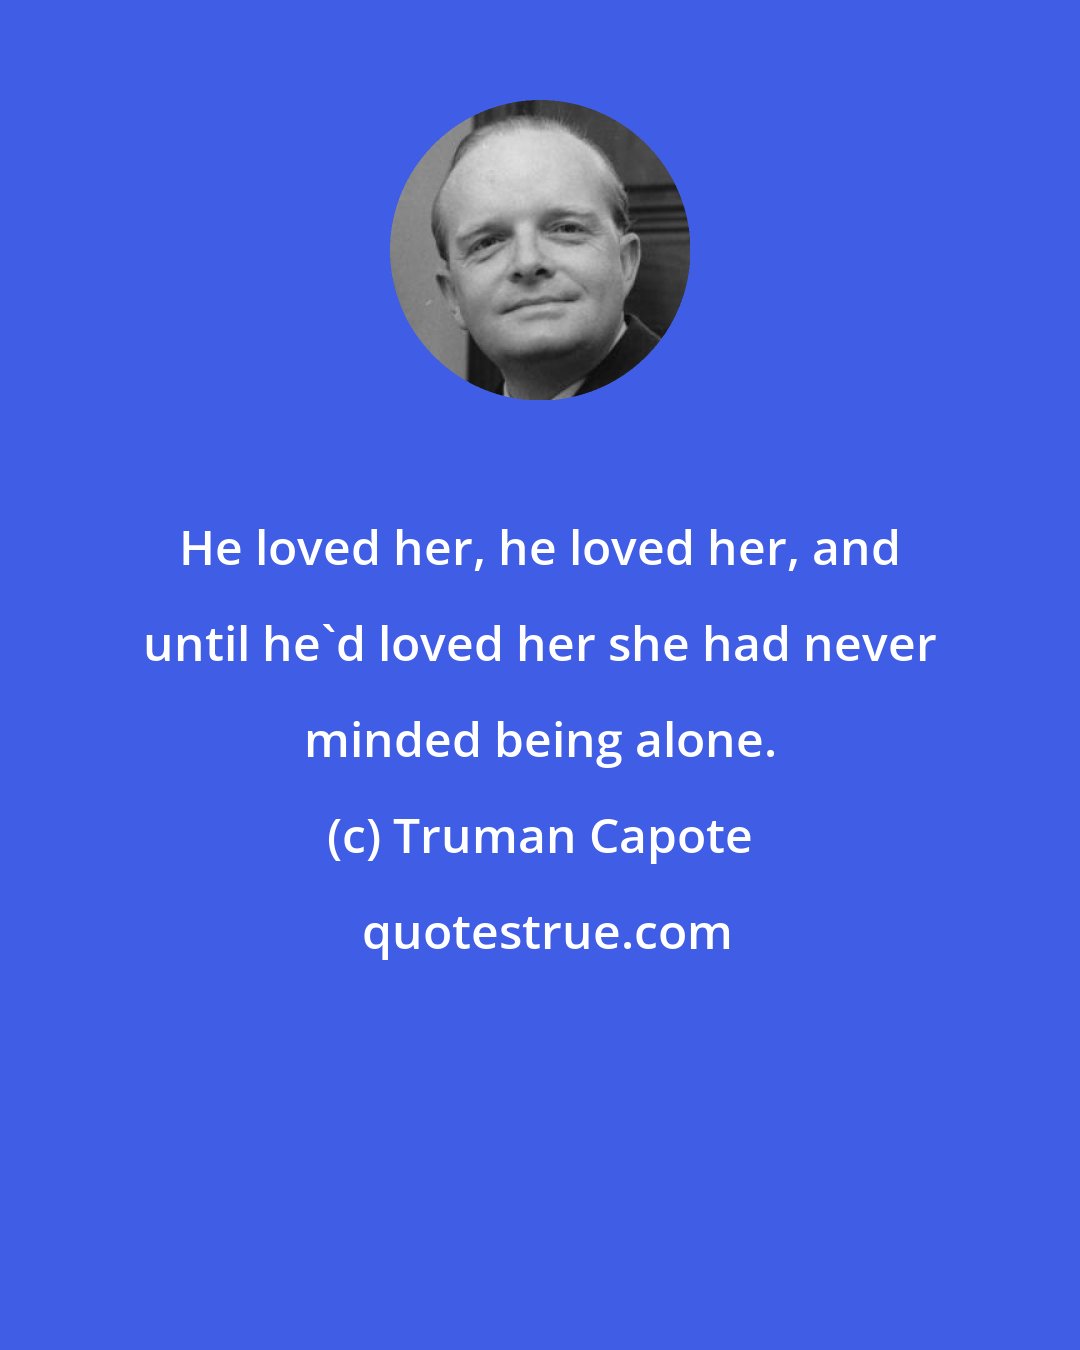 Truman Capote: He loved her, he loved her, and until he'd loved her she had never minded being alone.